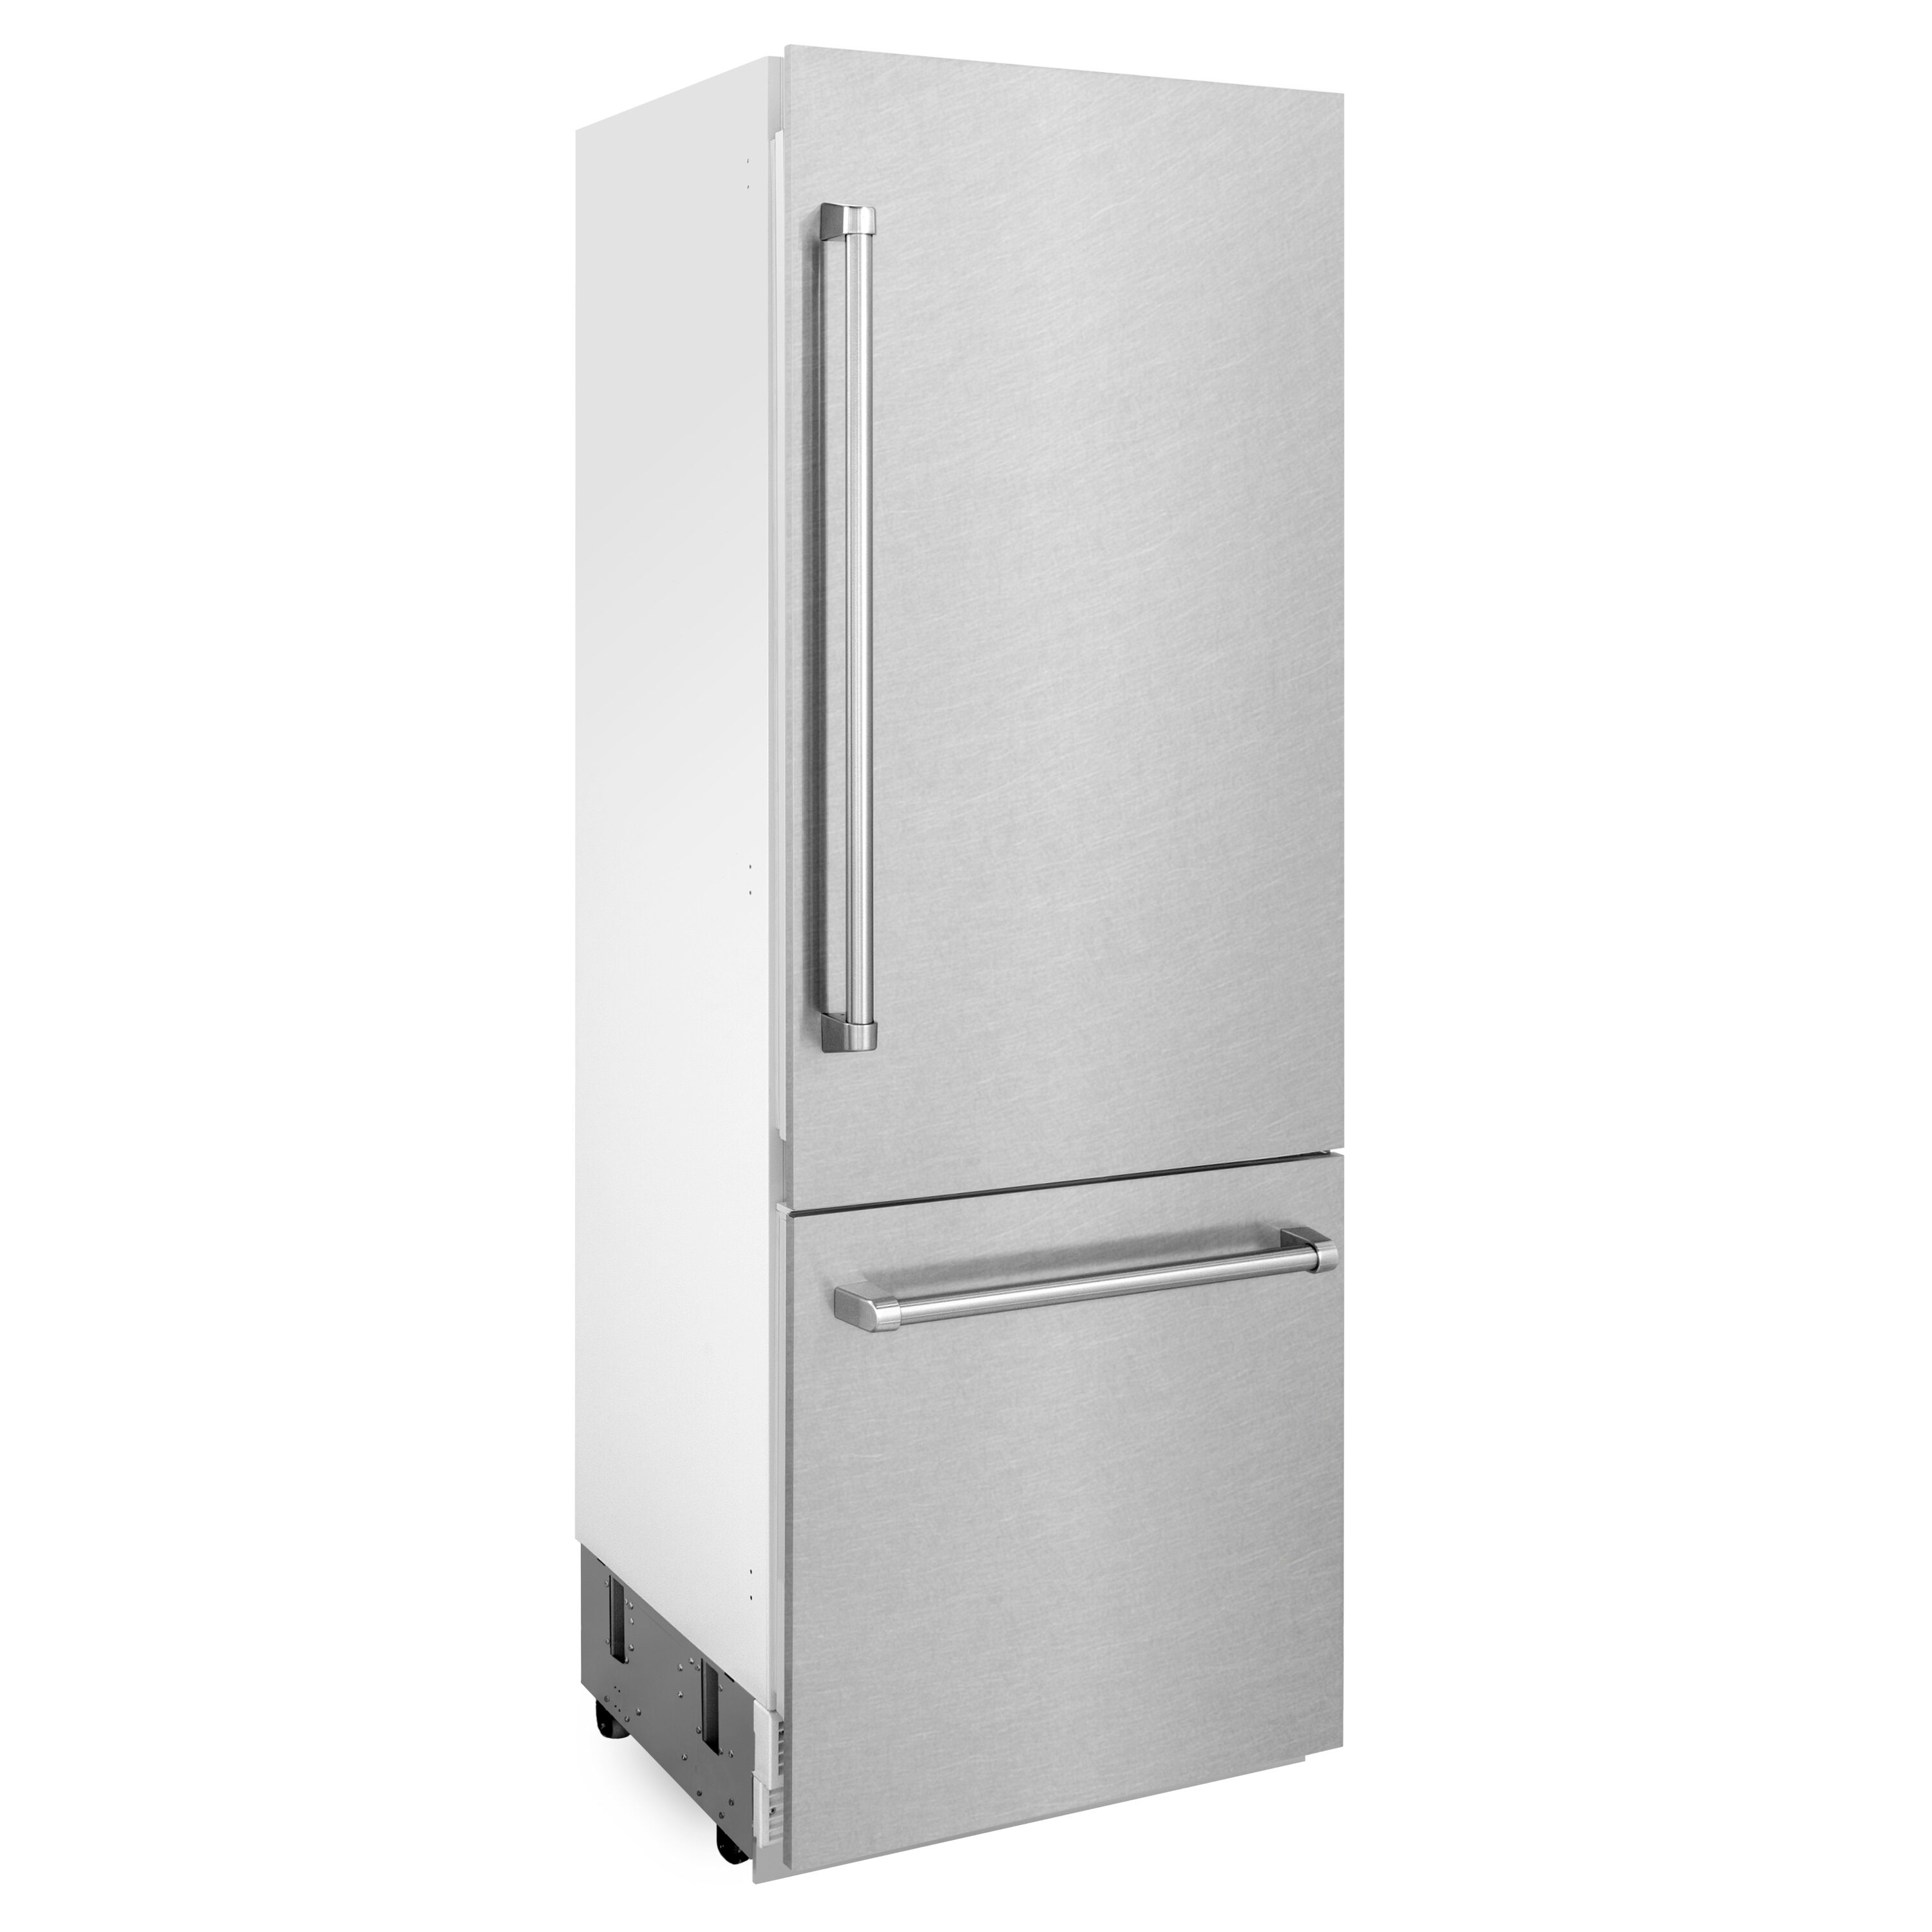 110V 21cu. FT Upright Freezer Total No Frost Big Portable Deep Freezers  Frost Free Home Use E-Star Electronic Control White Stainless Steel Freezer  for Sales - China Freezers and Freezer Vertical price